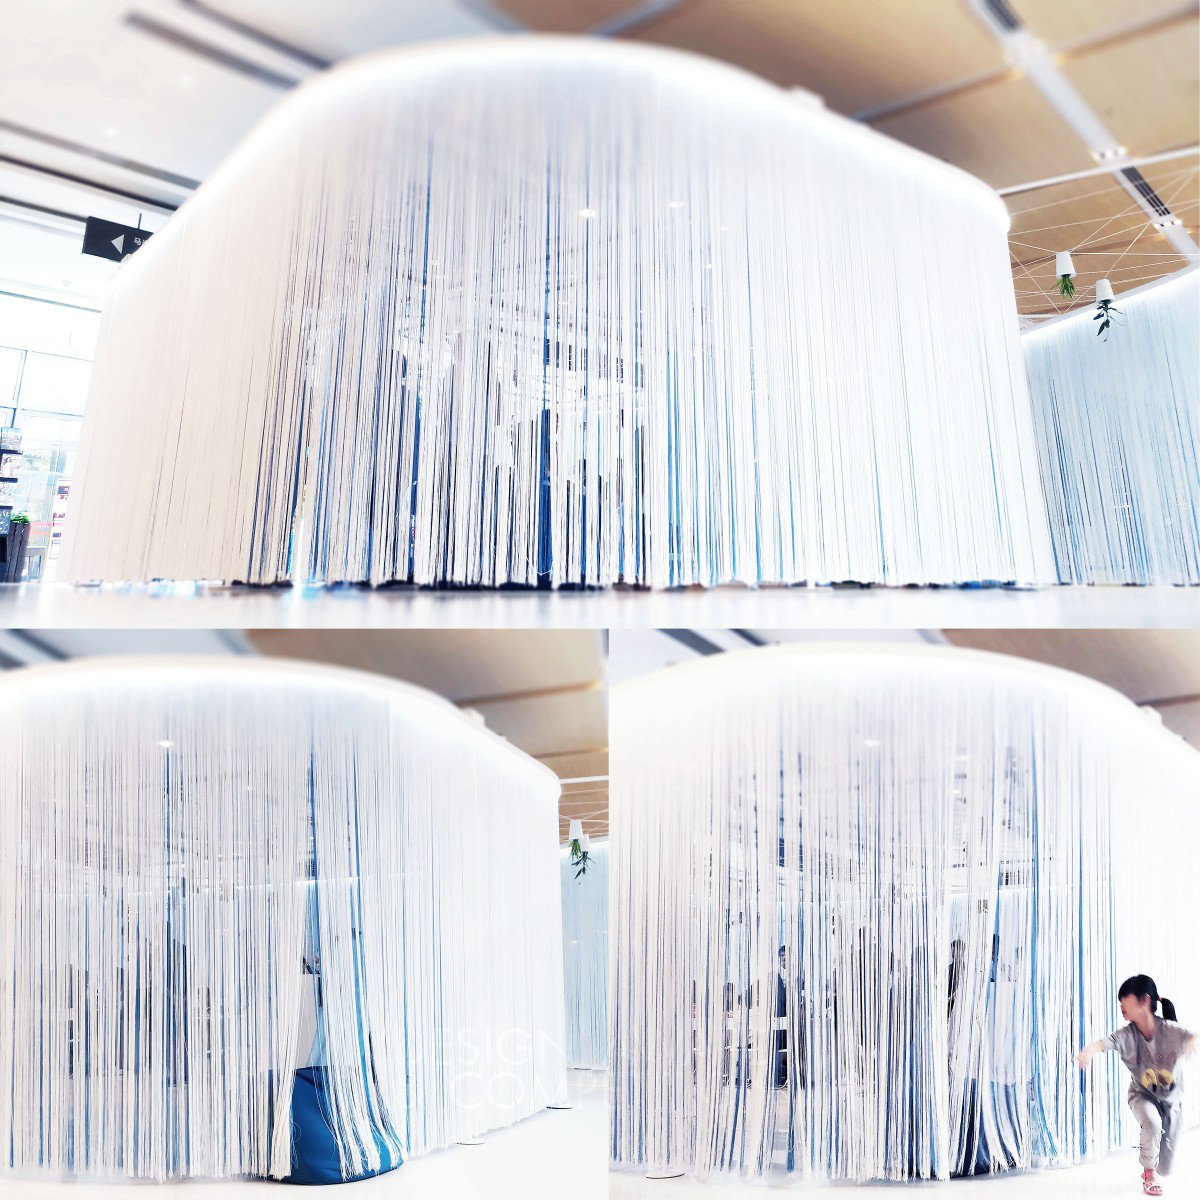 Airnemone Pavilion Interactive Exhibition Pavilion  by Kevin Chu Silver Interior Space and Exhibition Design Award Winner 2017 